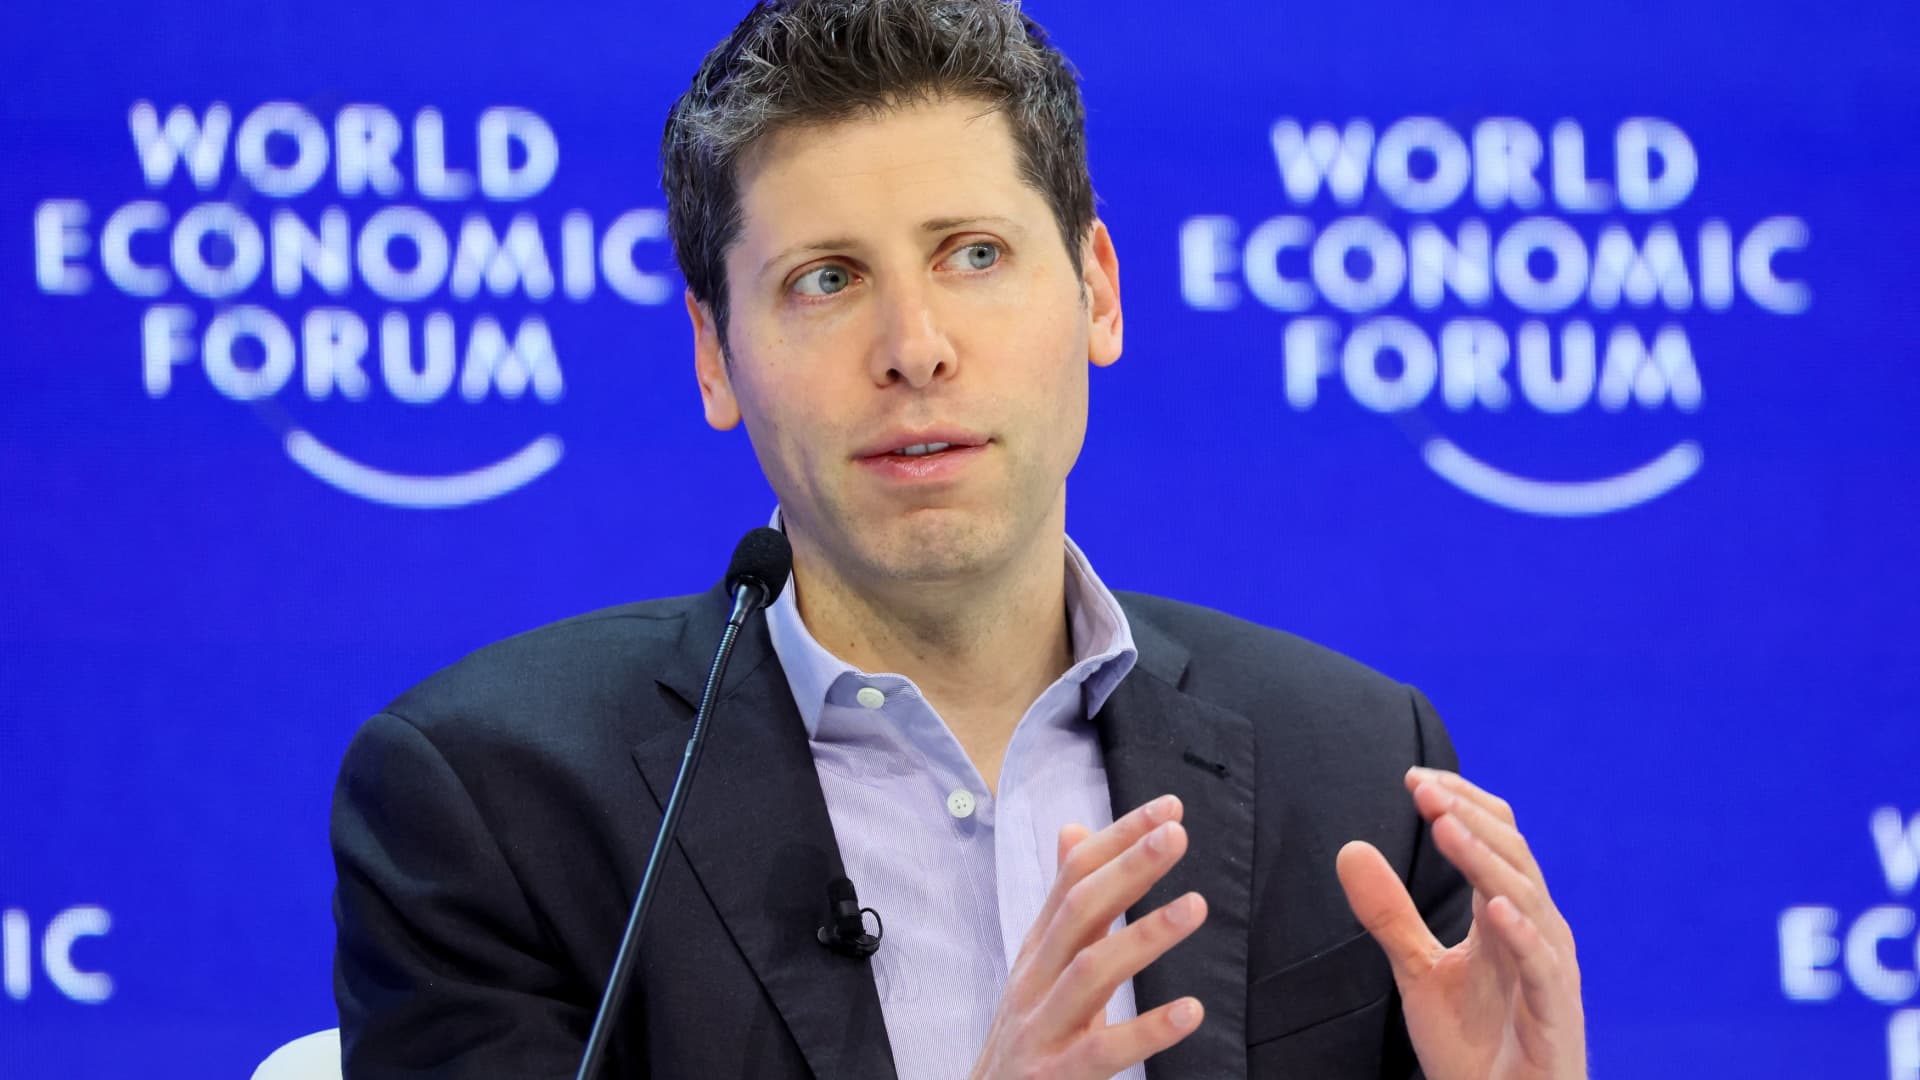 Sam Altman takes nuclear startup Oklo public to power AI ambitions